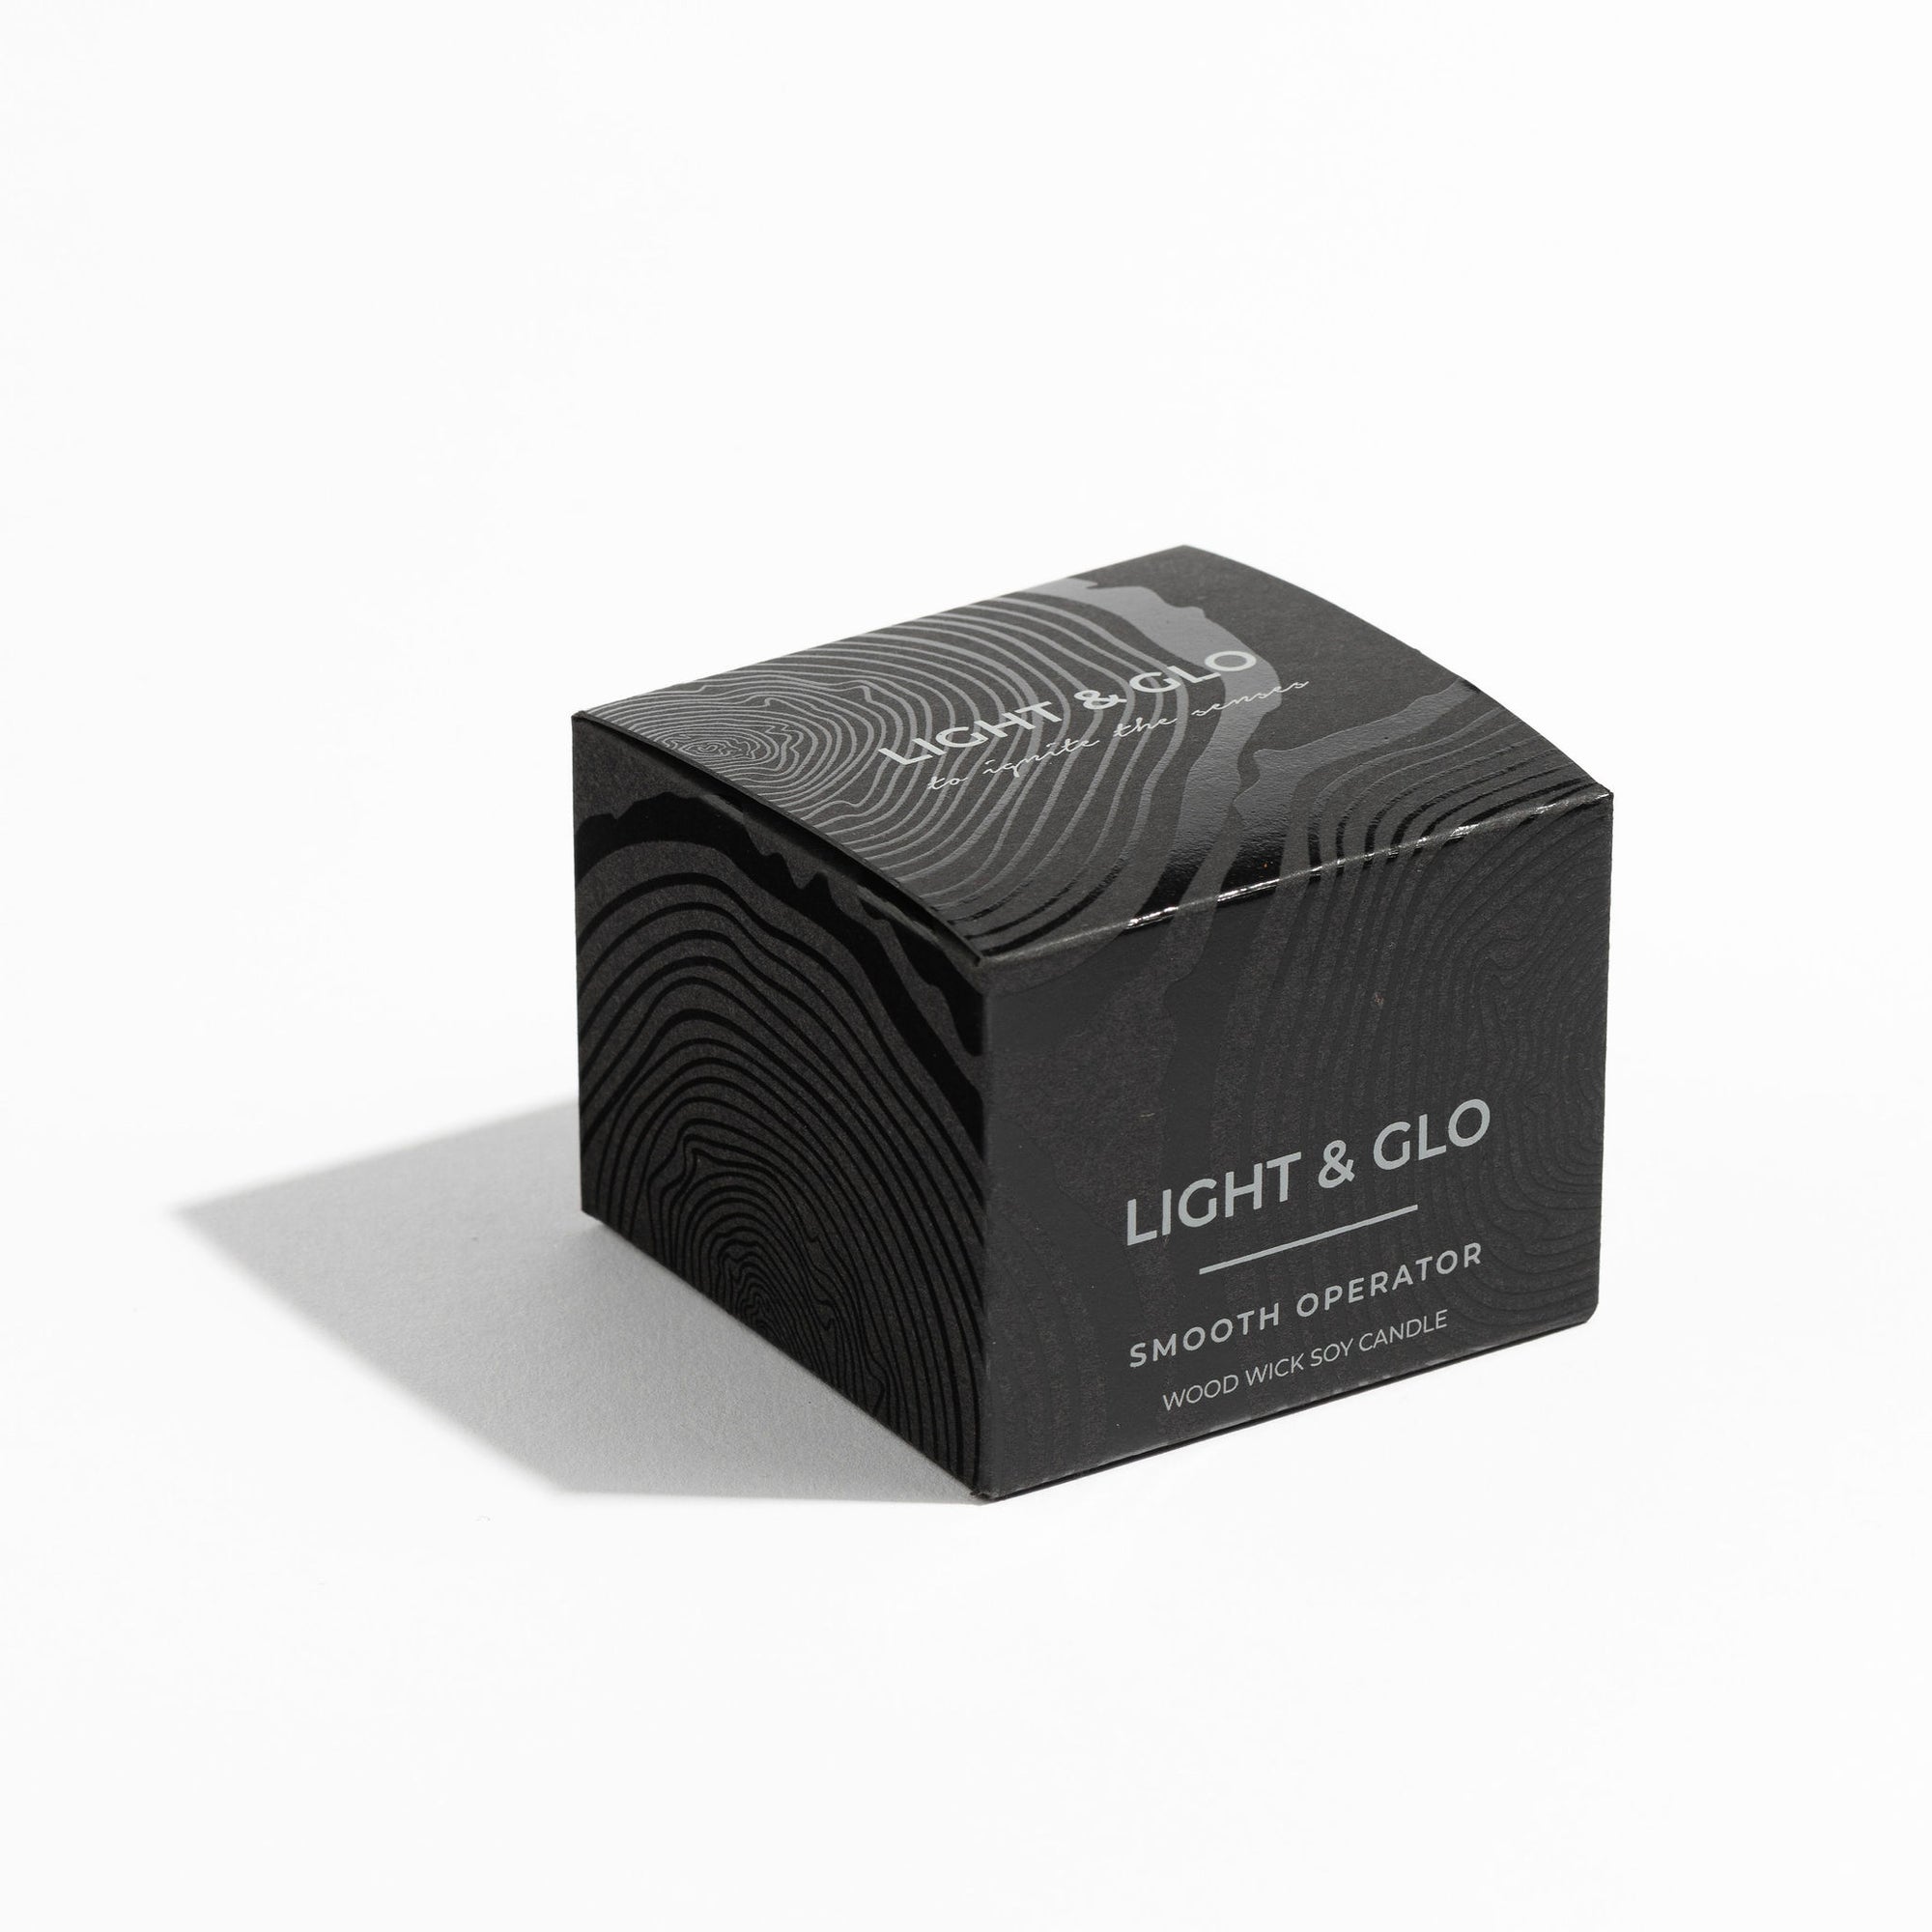 Smooth Operator - Noir Travel Candle | Luxury Candles & Home Fragrances by Light + Glo